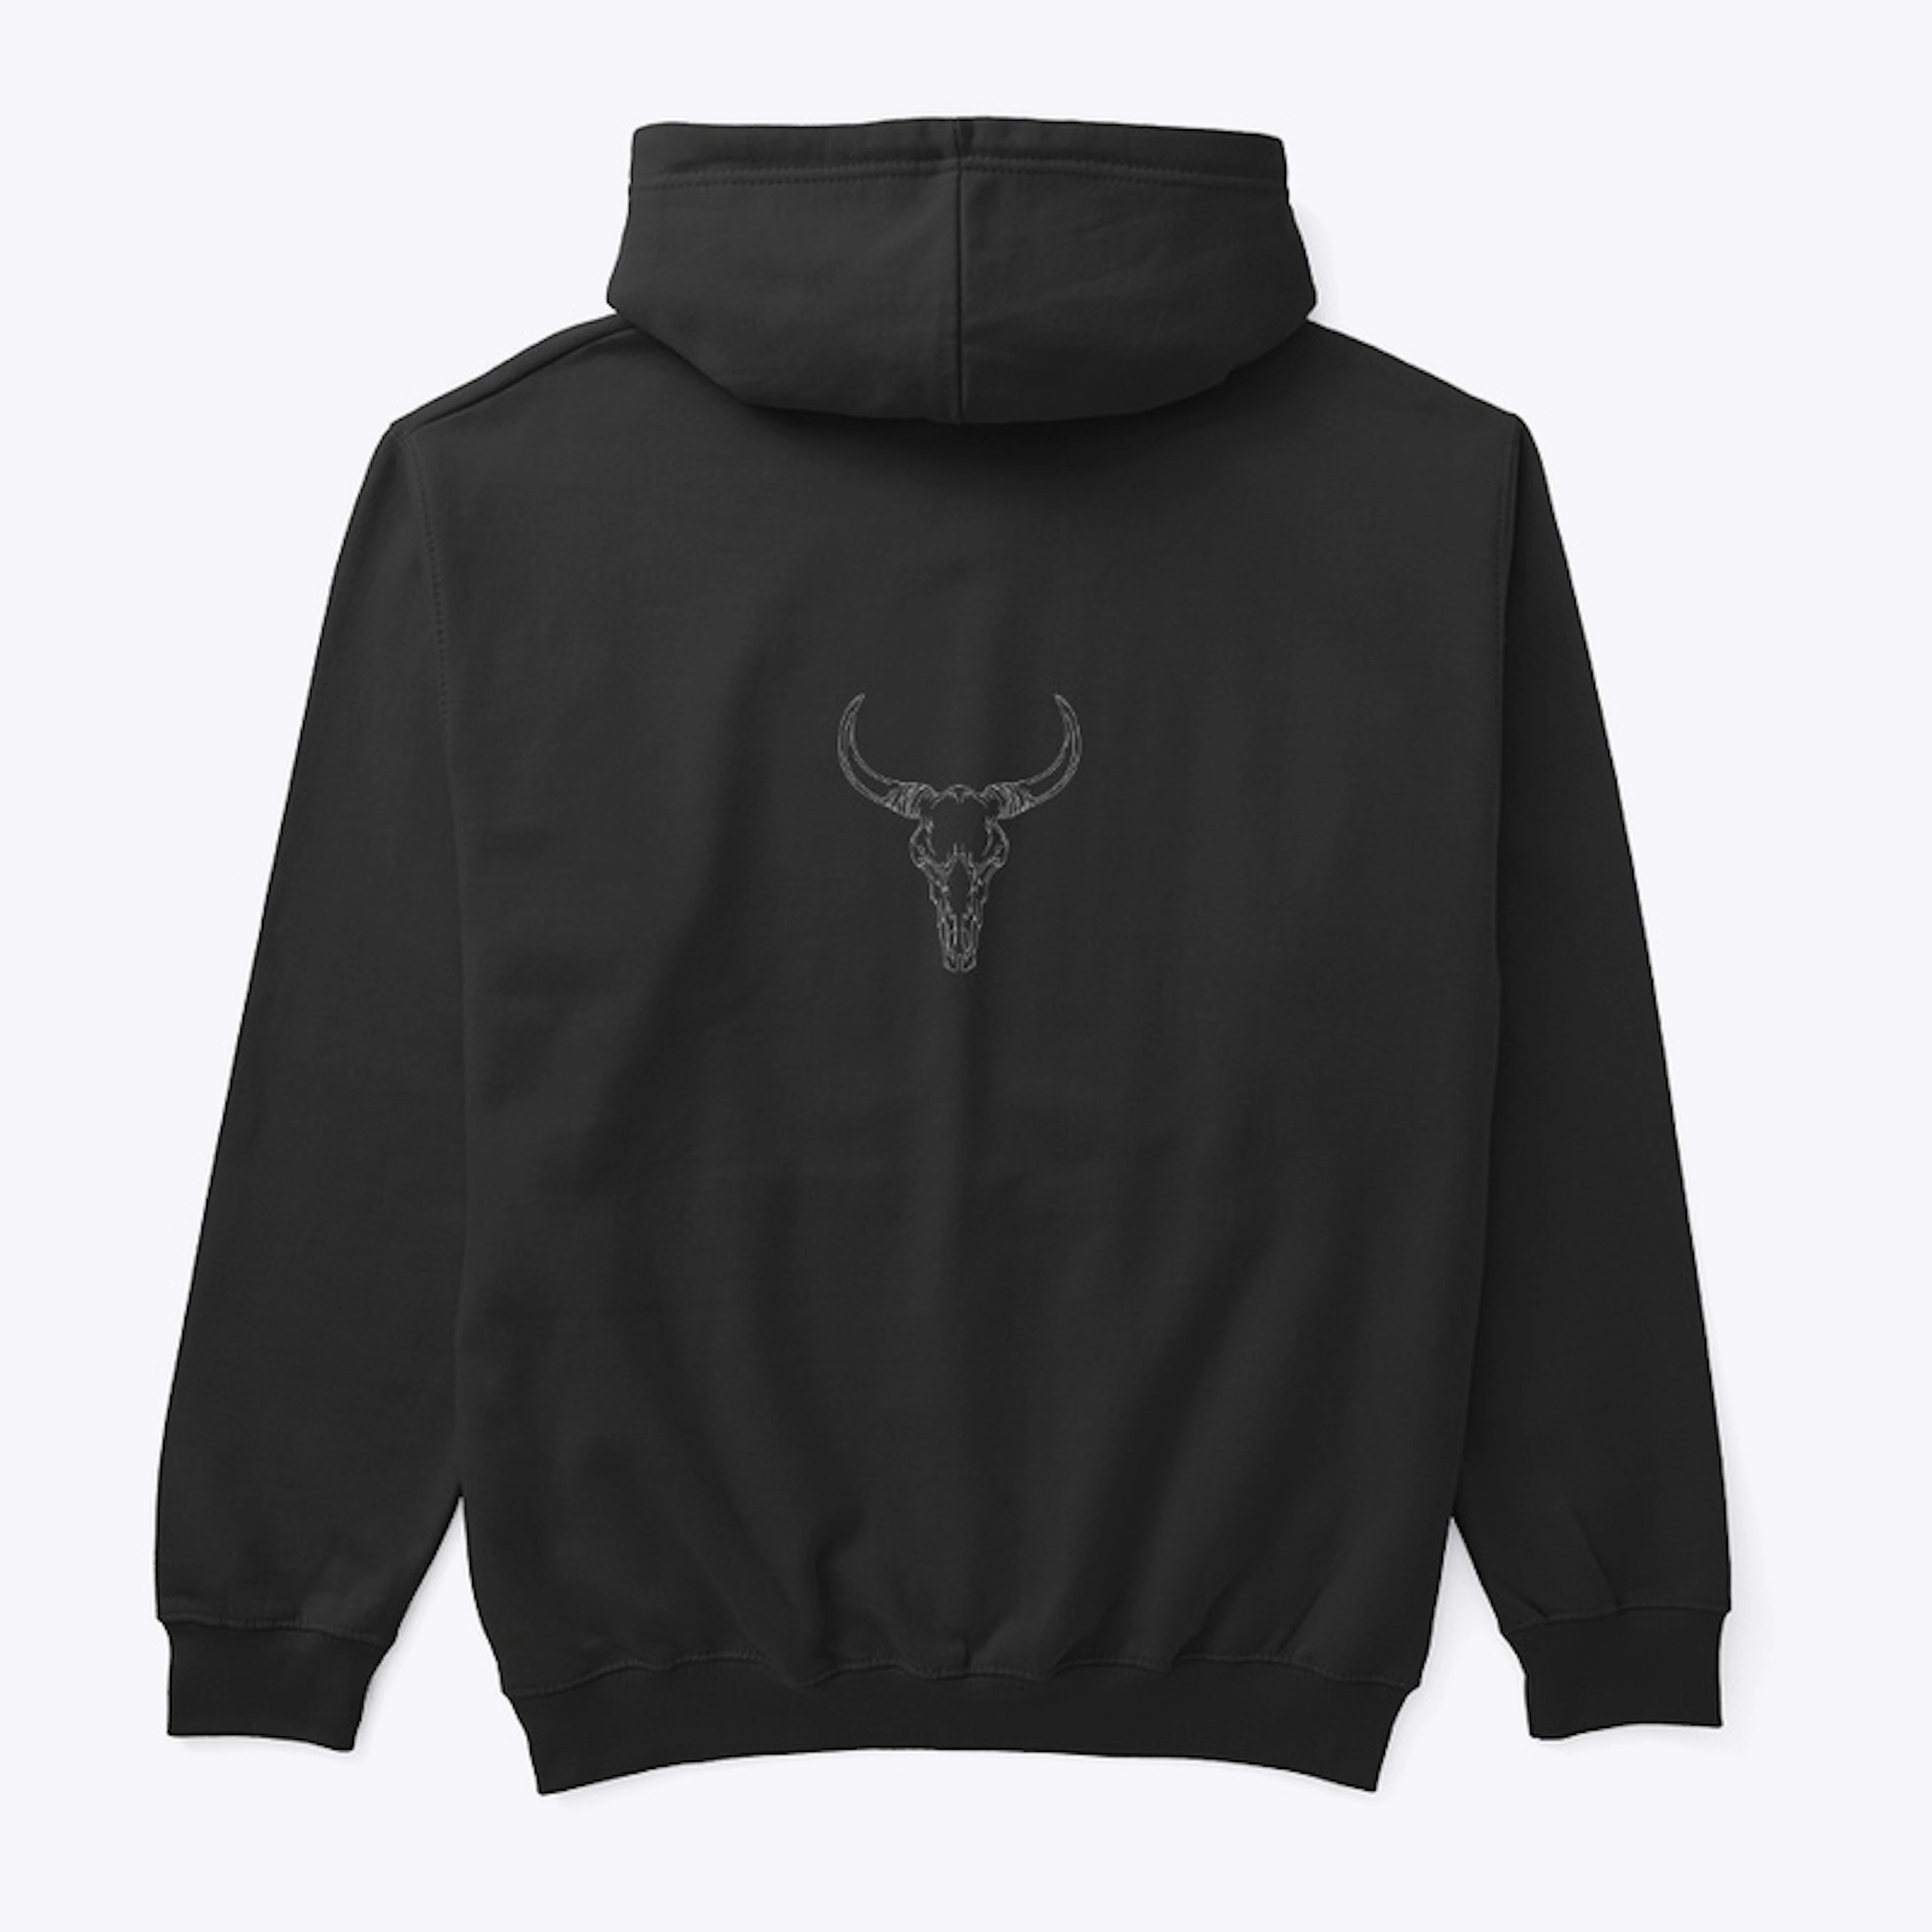 LostTrader "Bull" Collection 